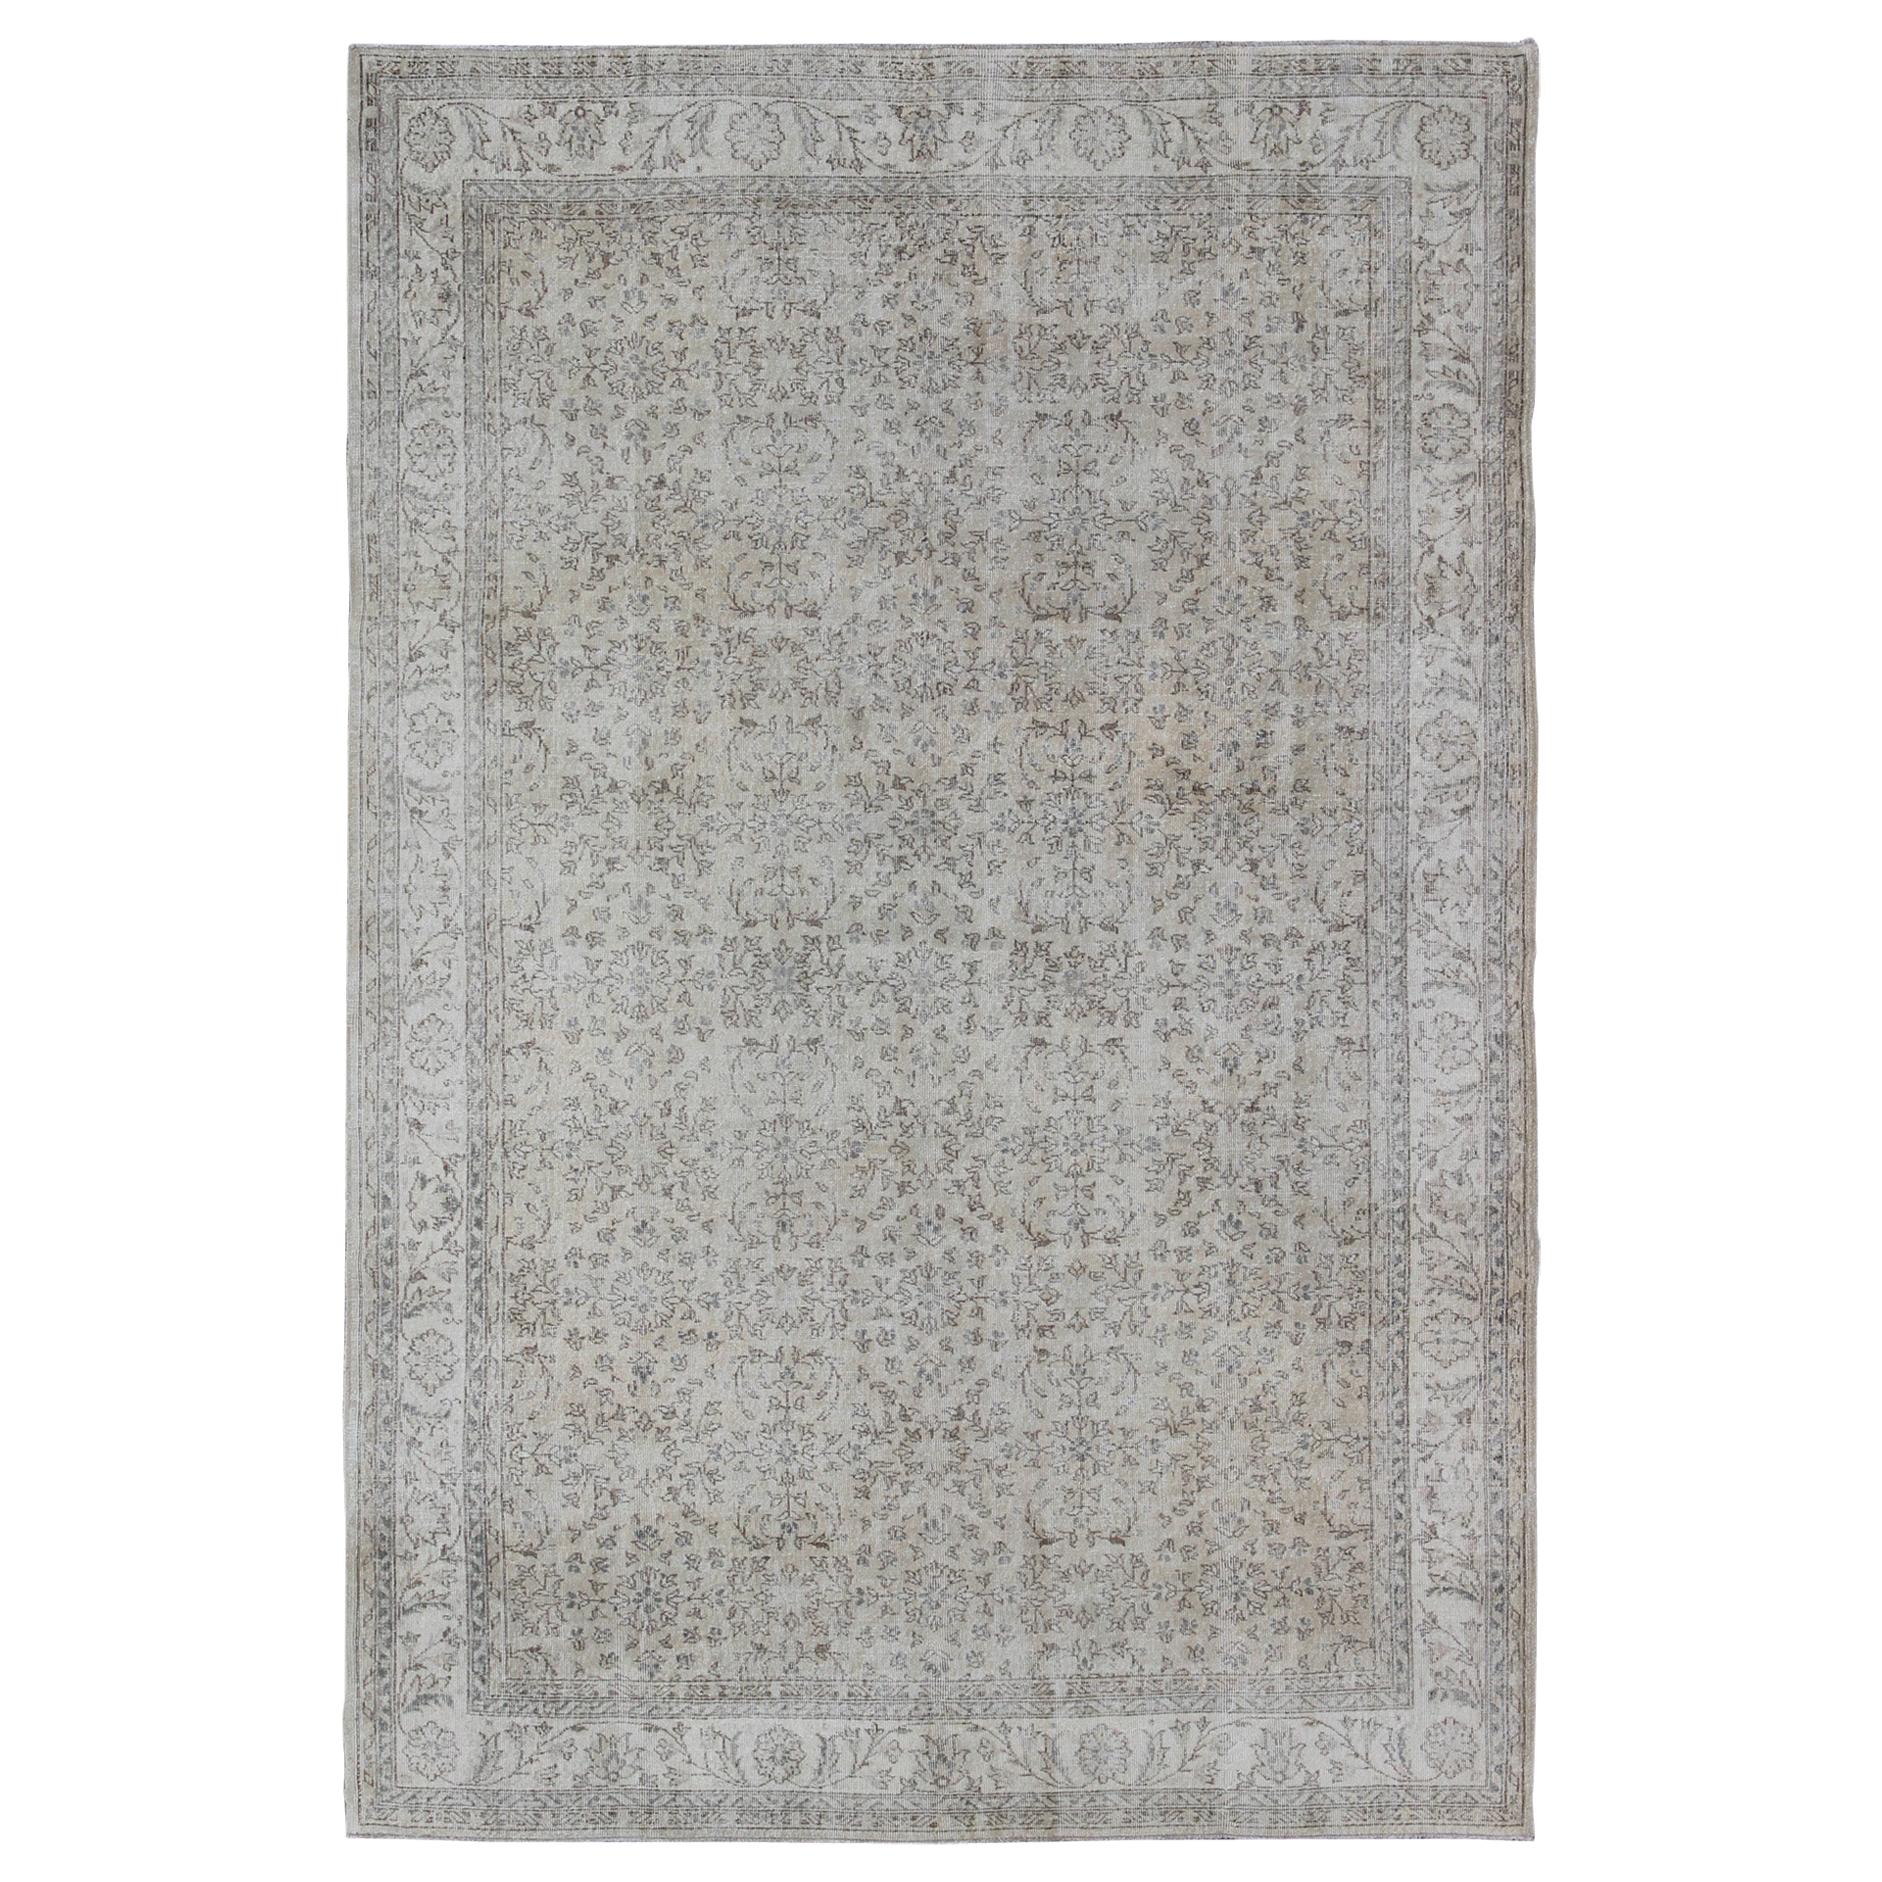 Neutral Colors Turkish Vintage Rug with Beautiful, Intricate Floral Design